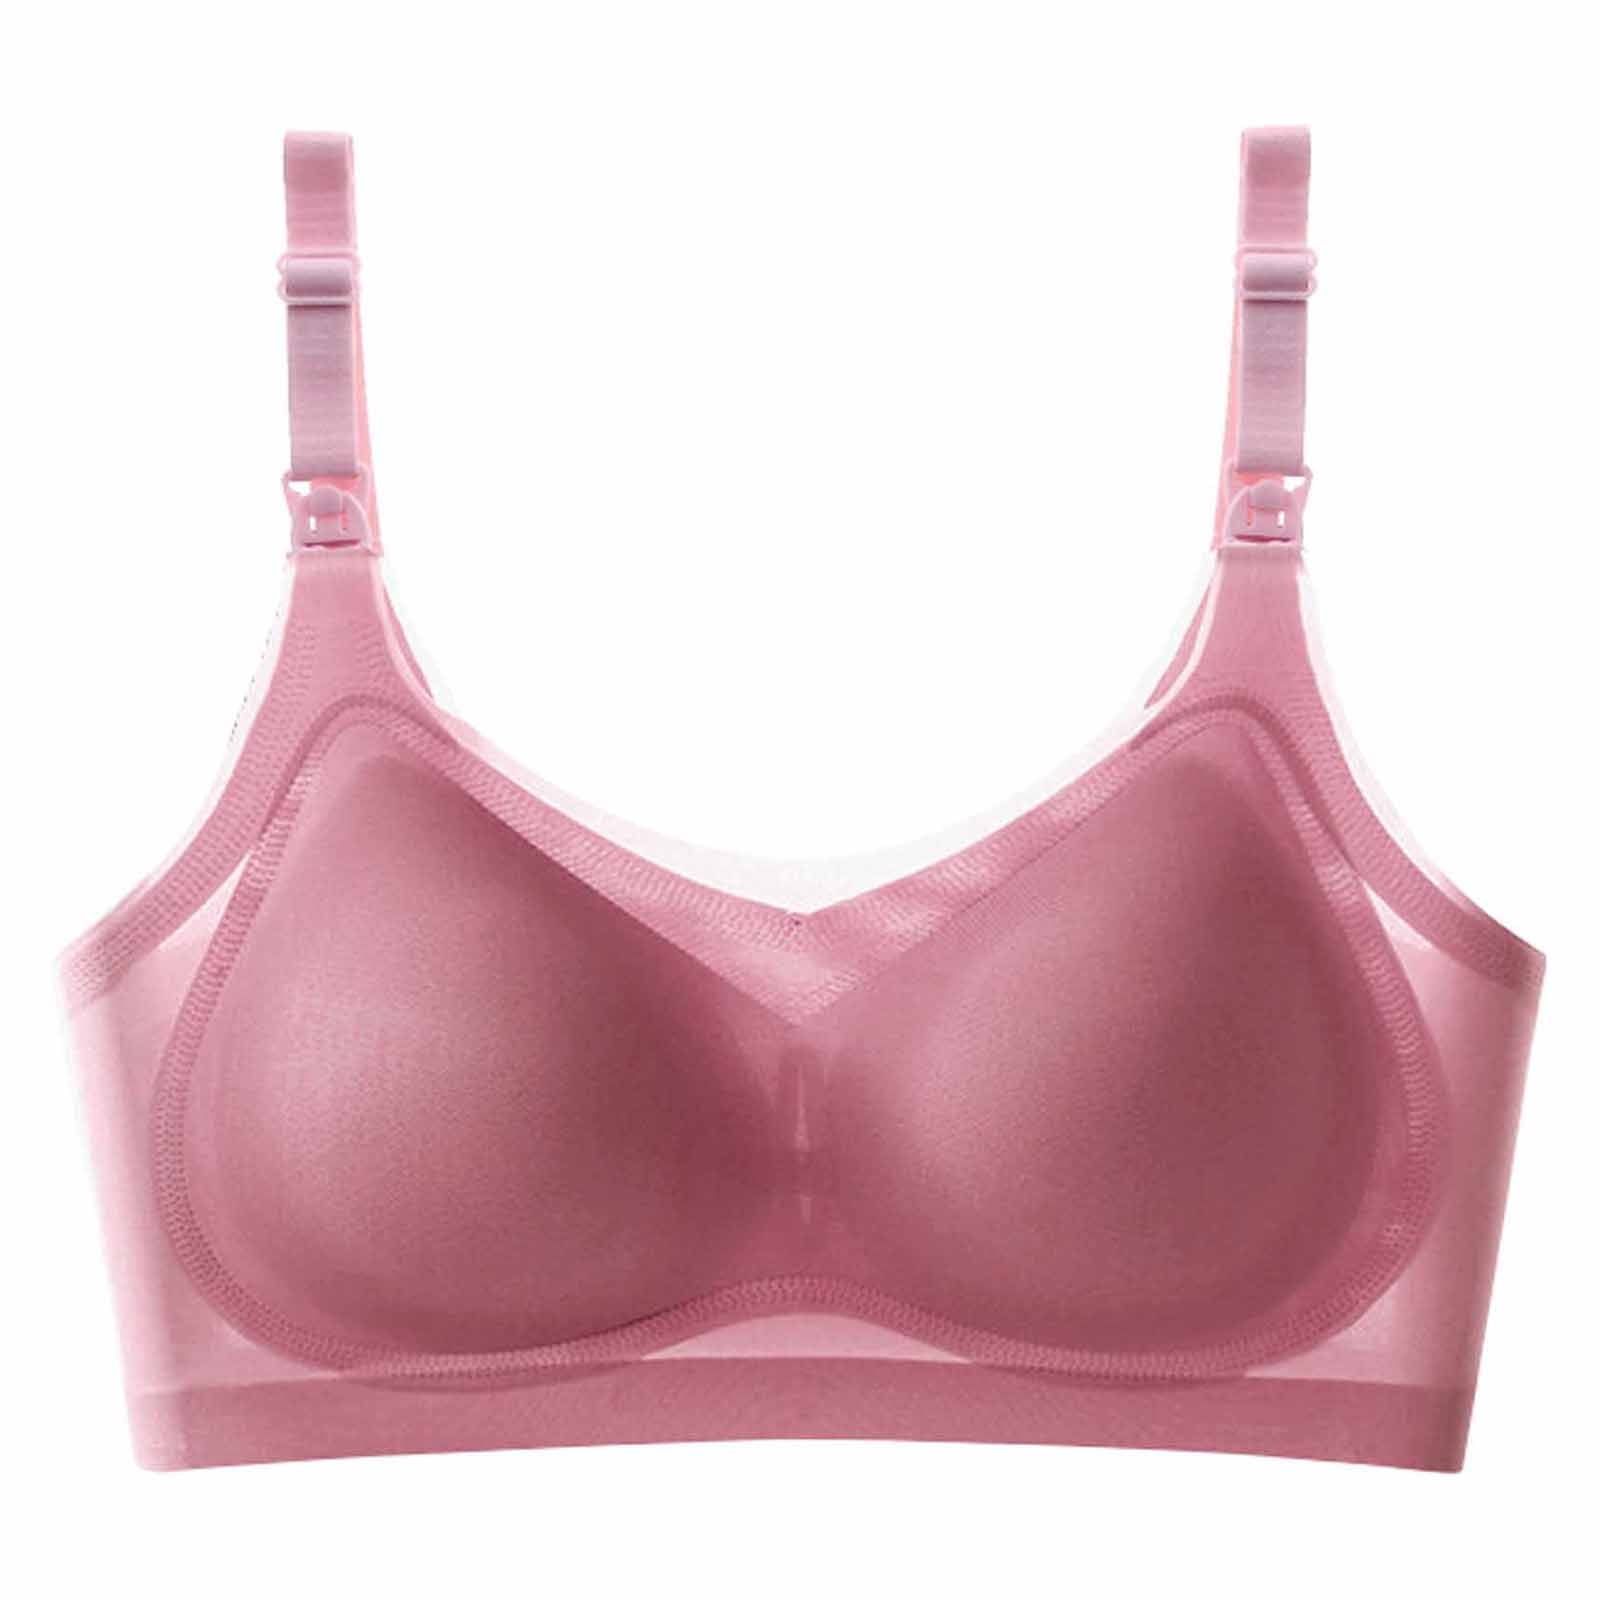 Penkiiy Womens Adhesive Bras Women's Silicone Invisible Bra Reusable Chest  Sticker Lifting Chest Anti-Bulging Pink Bras 